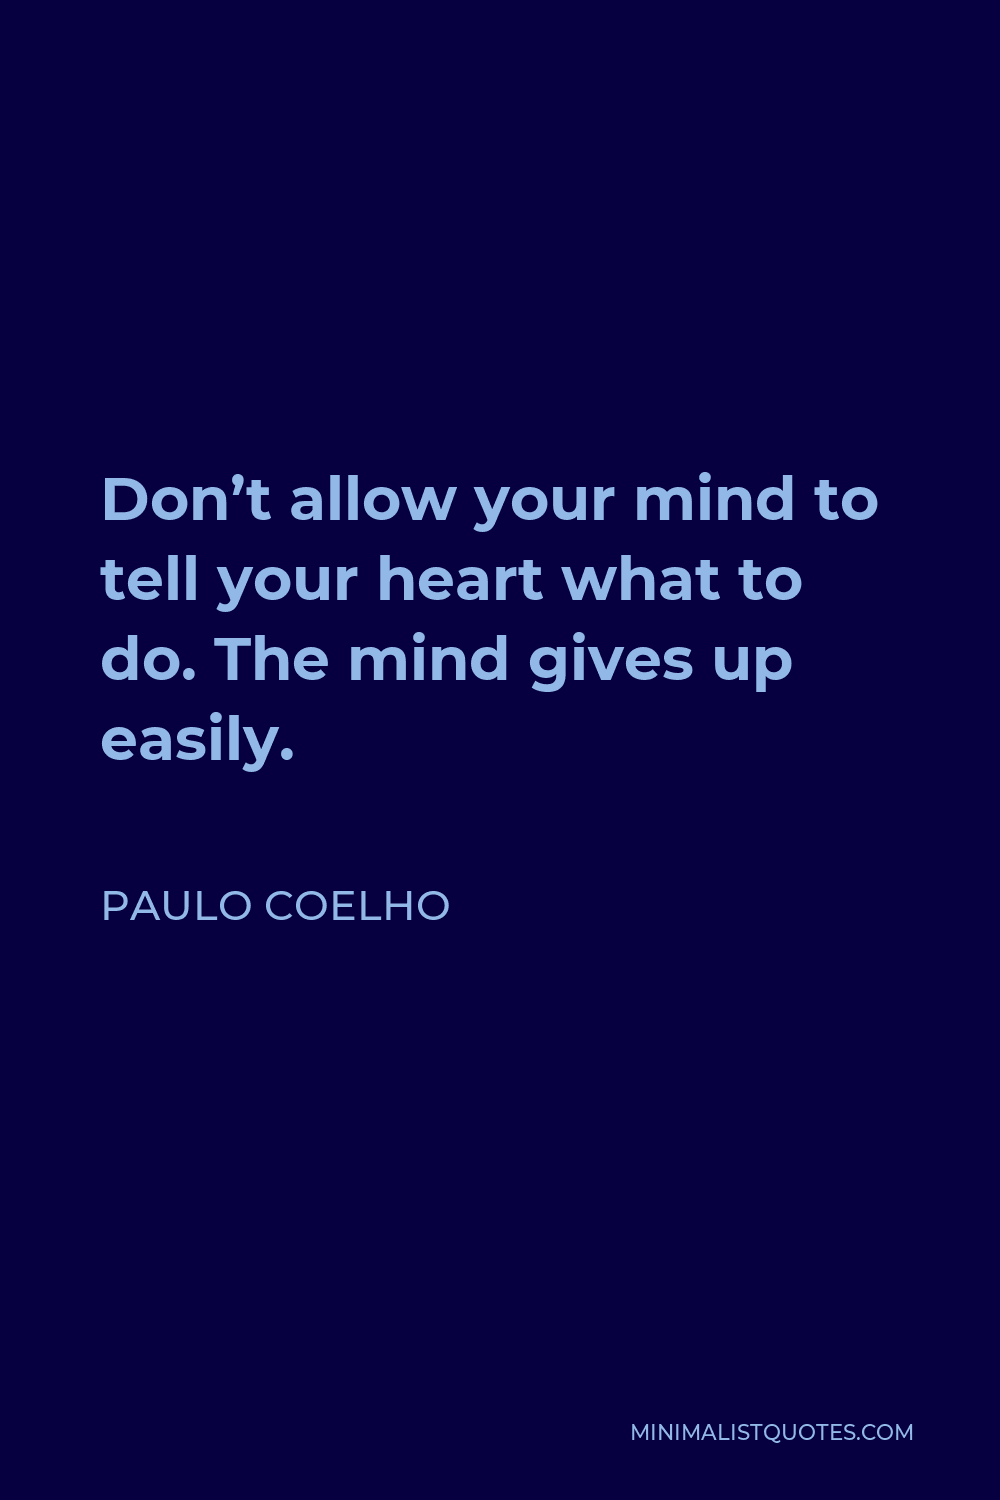 Paulo Coelho Quote - Don’t allow your mind to tell your heart what to do. The mind gives up easily.